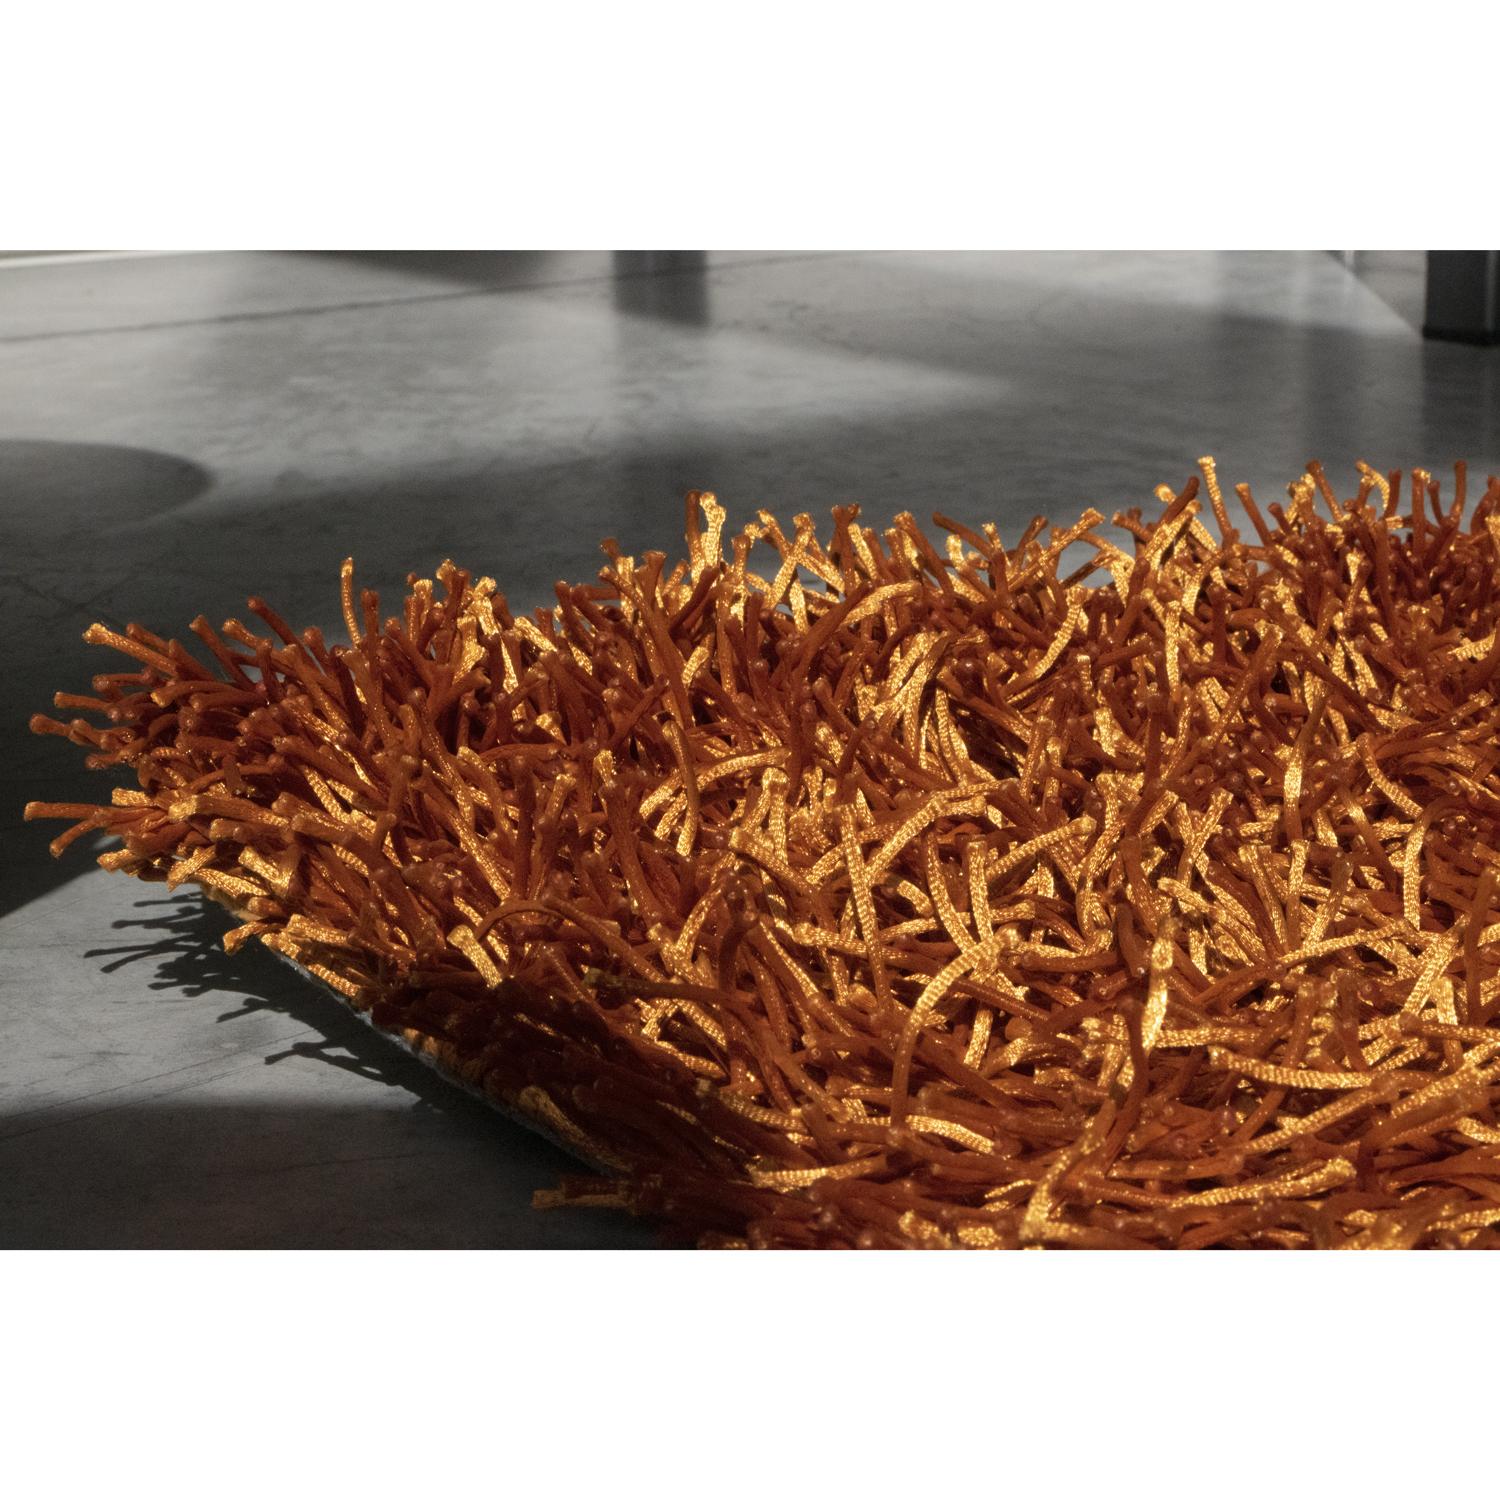 Woven Seasonal Style Spring Orange Rug by Deanna Comellini In Stock 170x240 cm For Sale